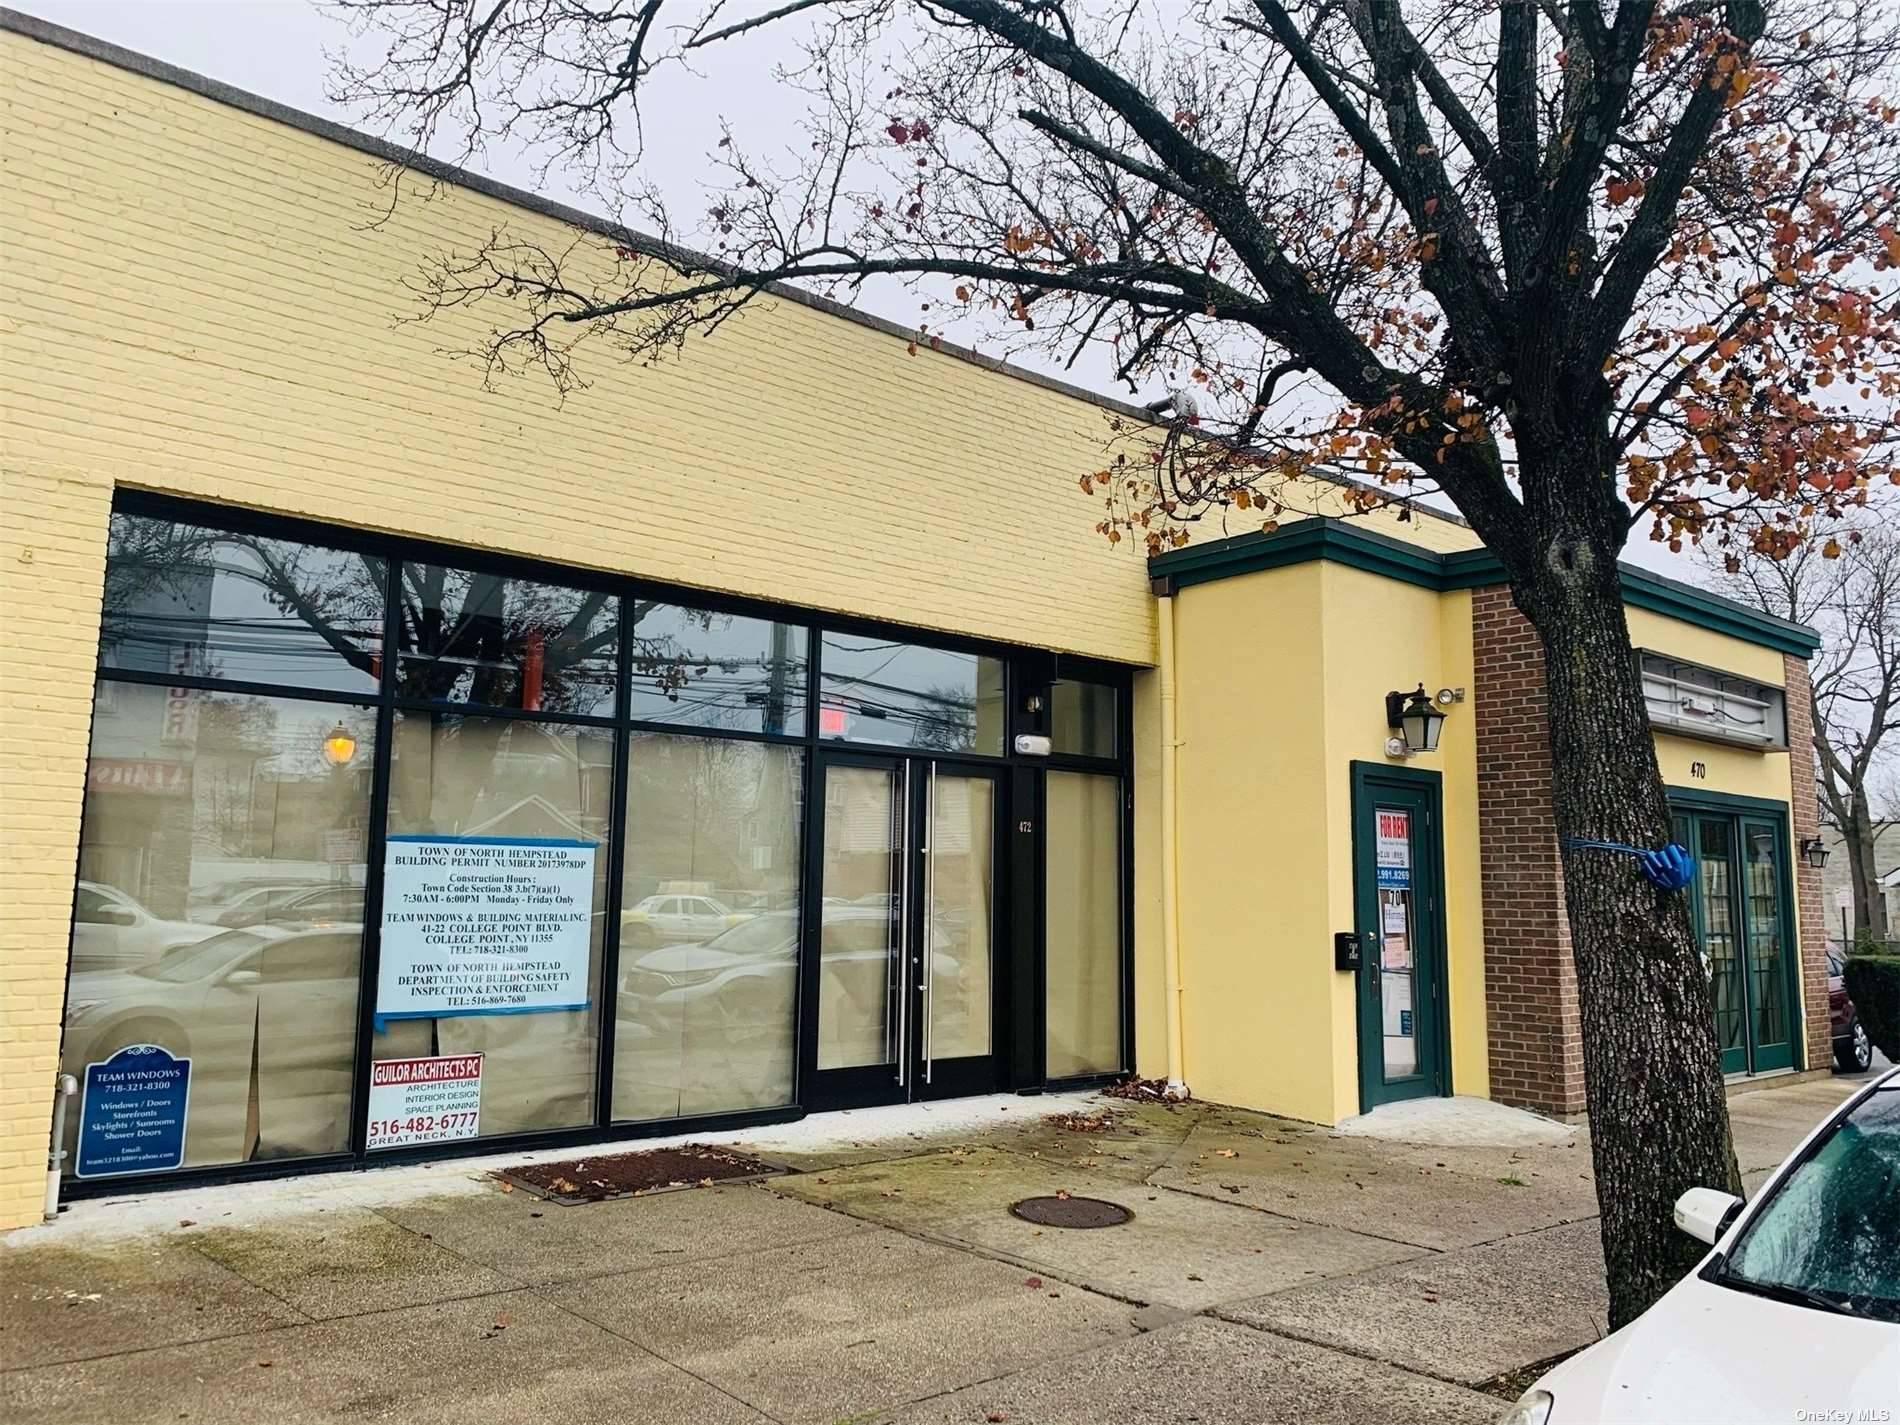 Downtown Carle Place Business District, 2018 Re Built Commercial Retail Stores, Medical Spa, Massage Therapy, Nail Hair Salon For Sale In Long Island Carle Place Business District.